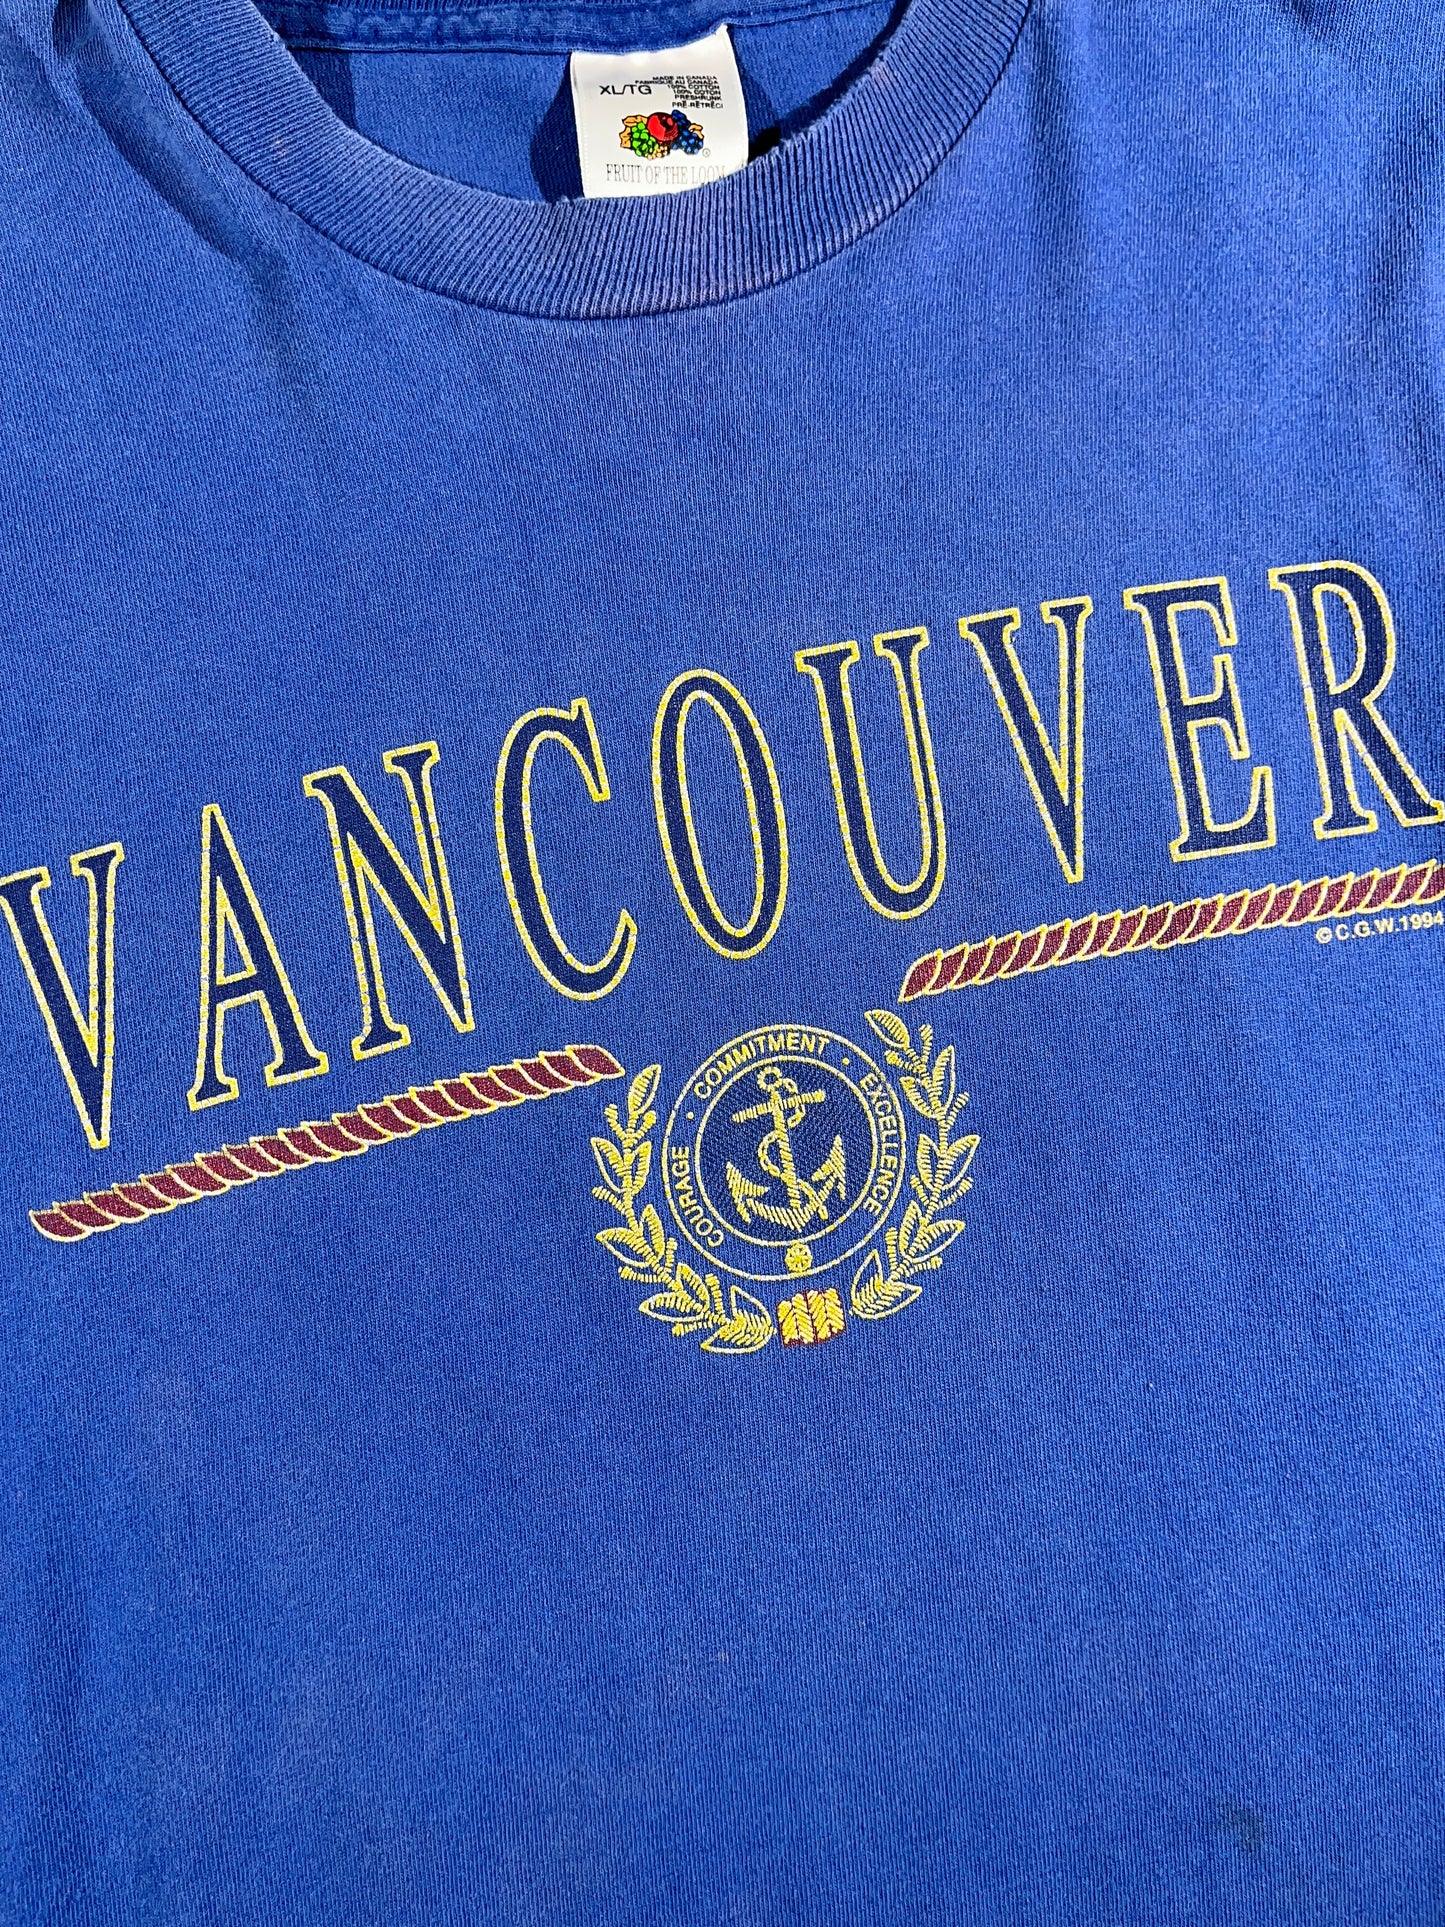 Vintage Vancouver T-Shirt 90's Made In Canada Tourist Tee